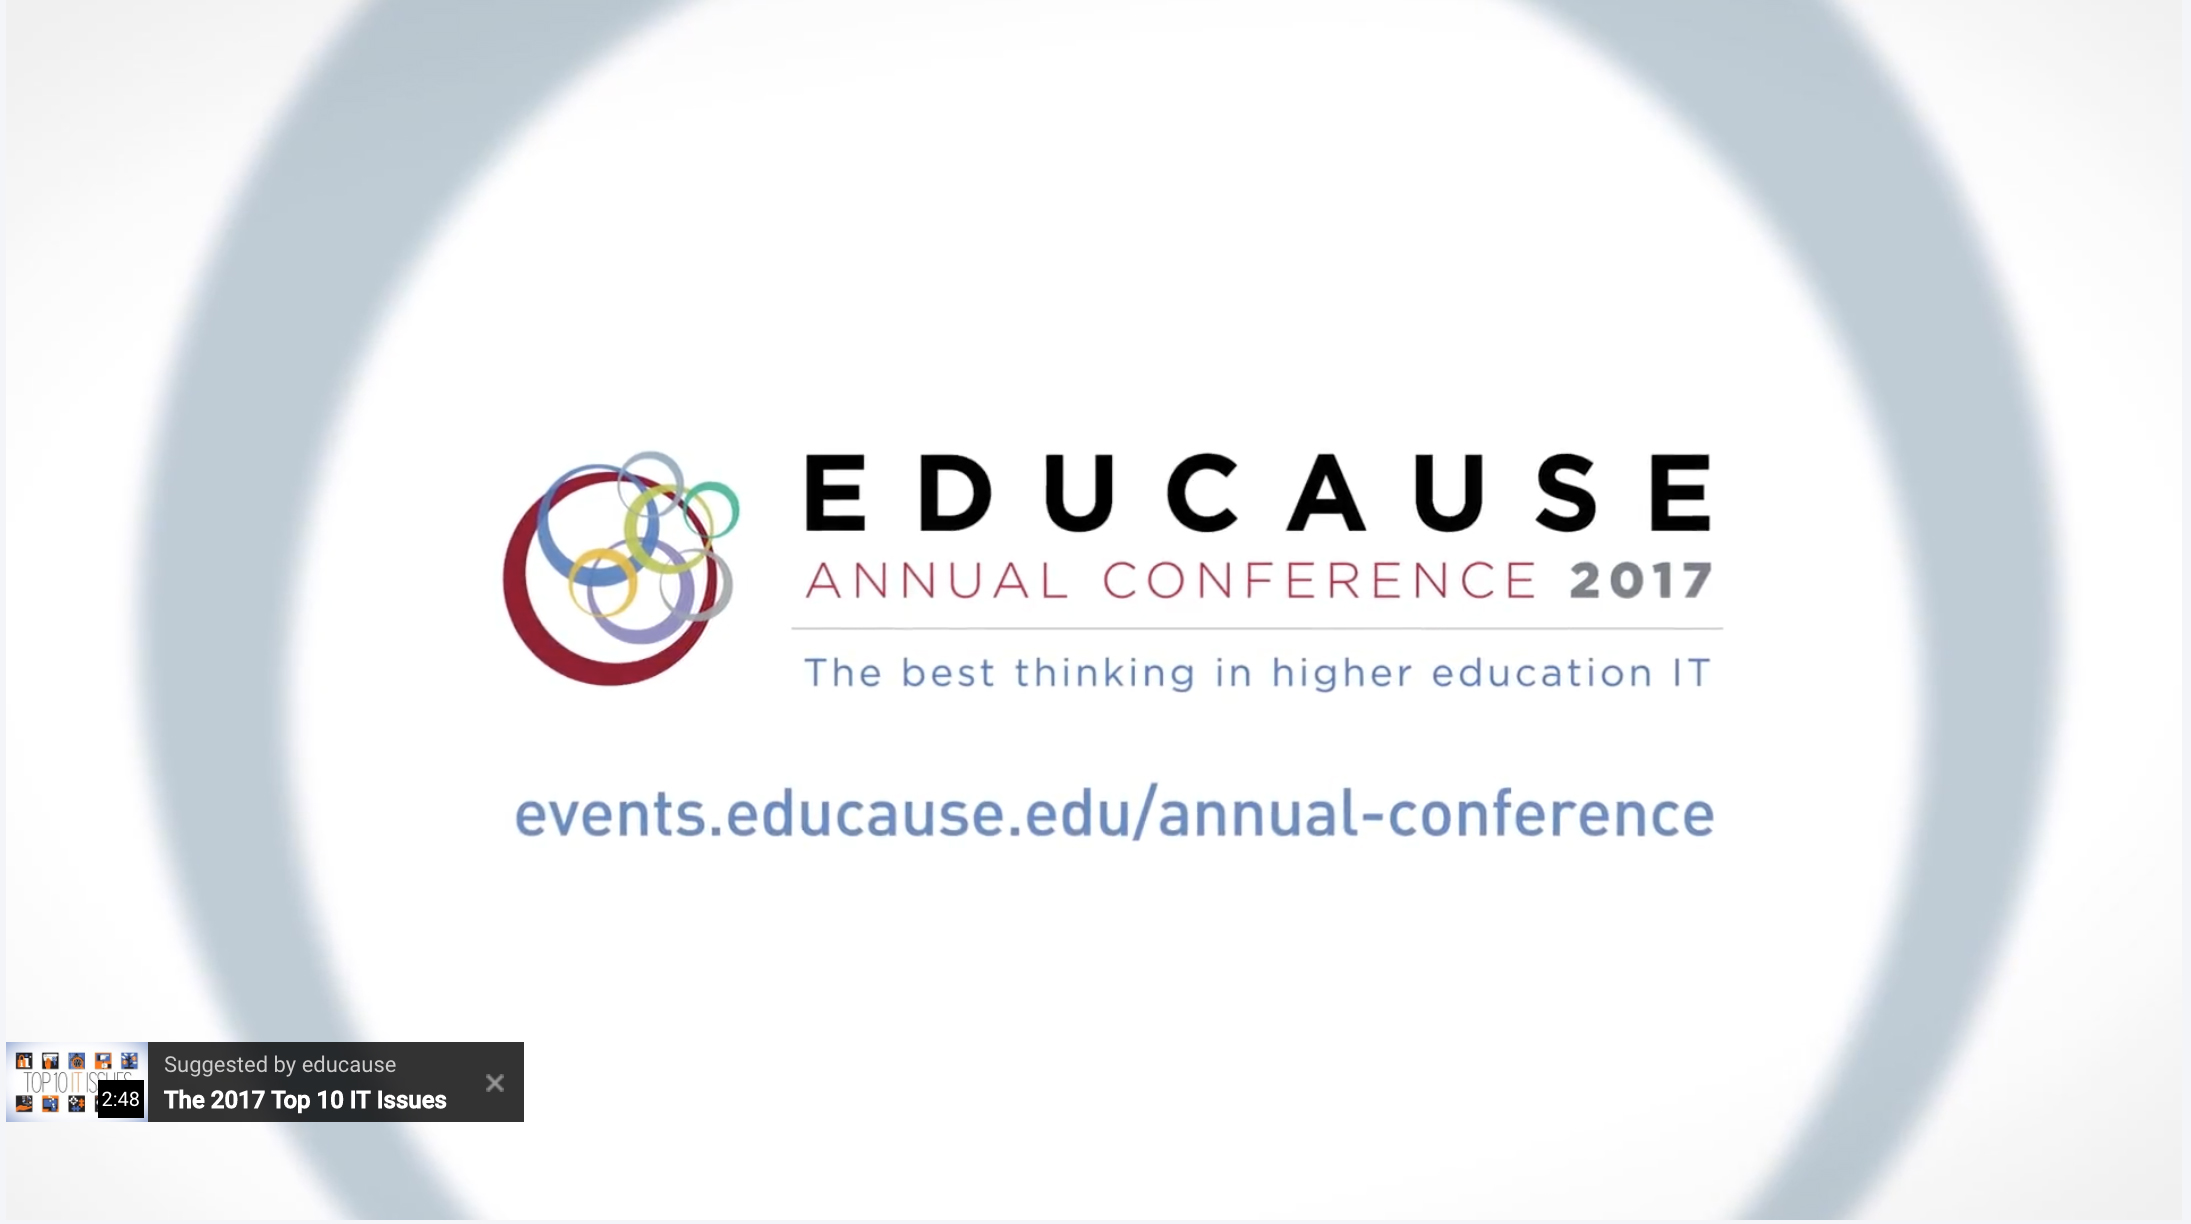 SMARTdesks to Appear at EDUCAUSE Annual Conference, Booth 953, in